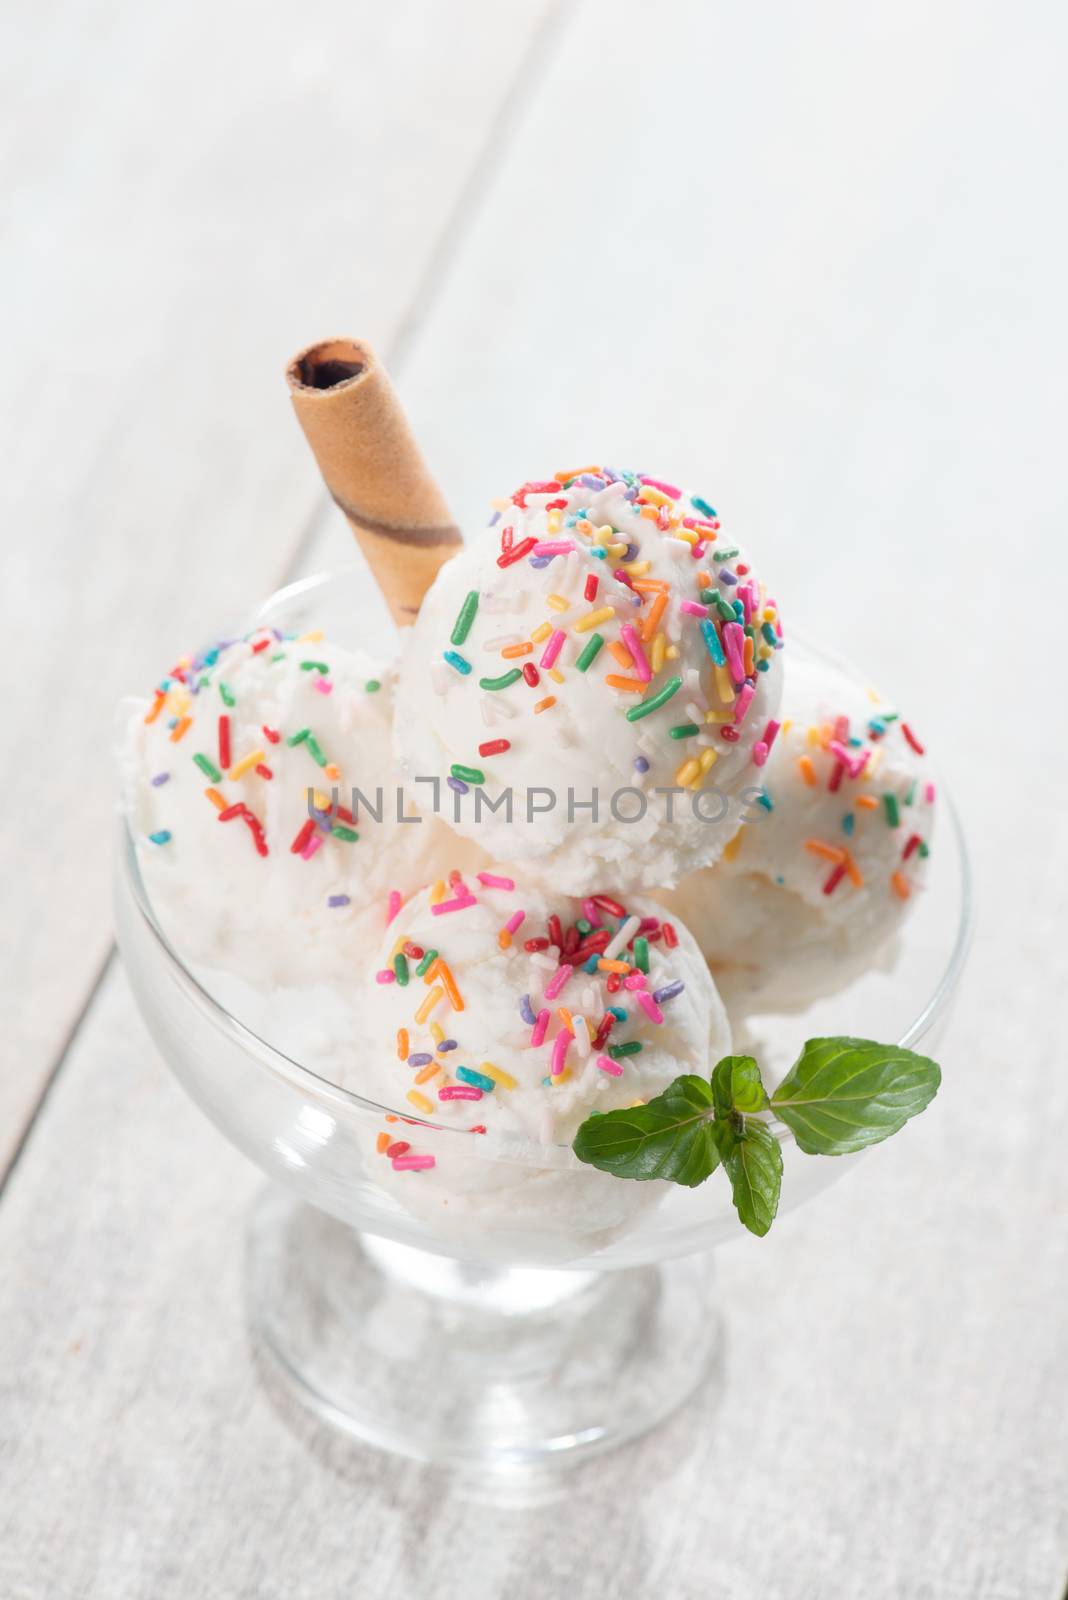 Vanilla ice cream in cup with waffle on white rustic wooden background.